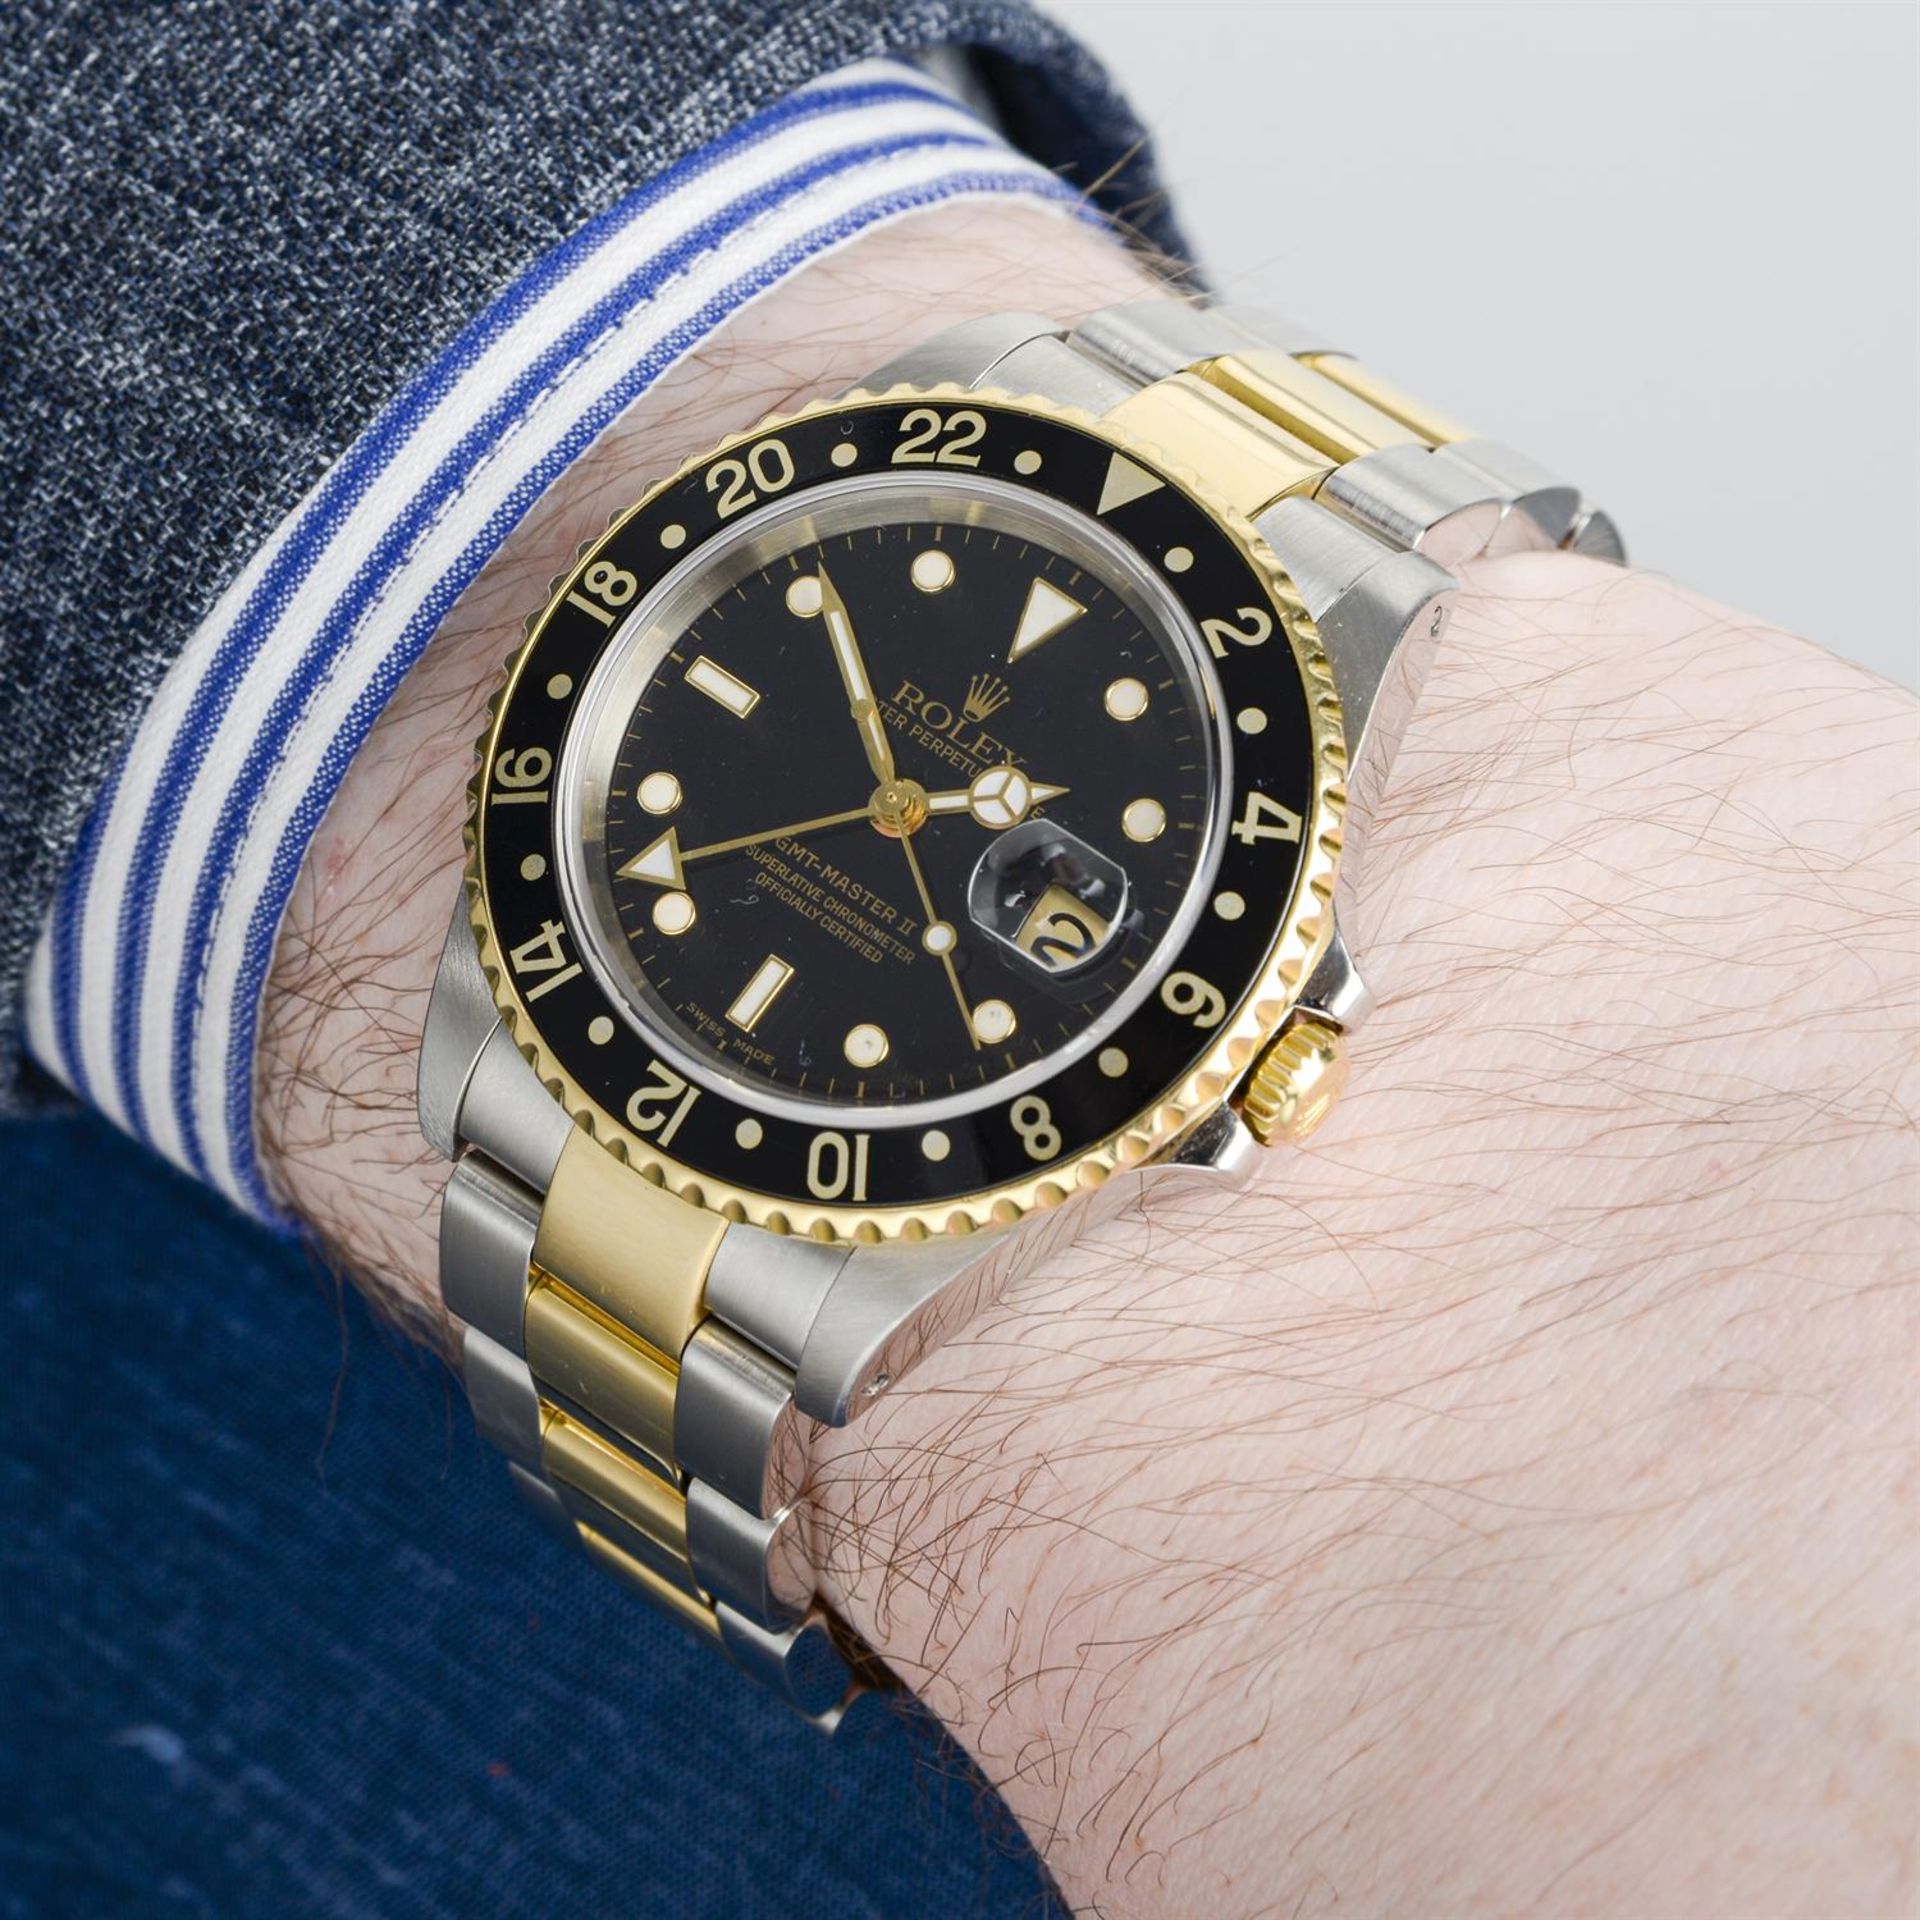 Rolex - an Oyster Perpetual GMT- Master II watch, 40mm. - Image 6 of 7